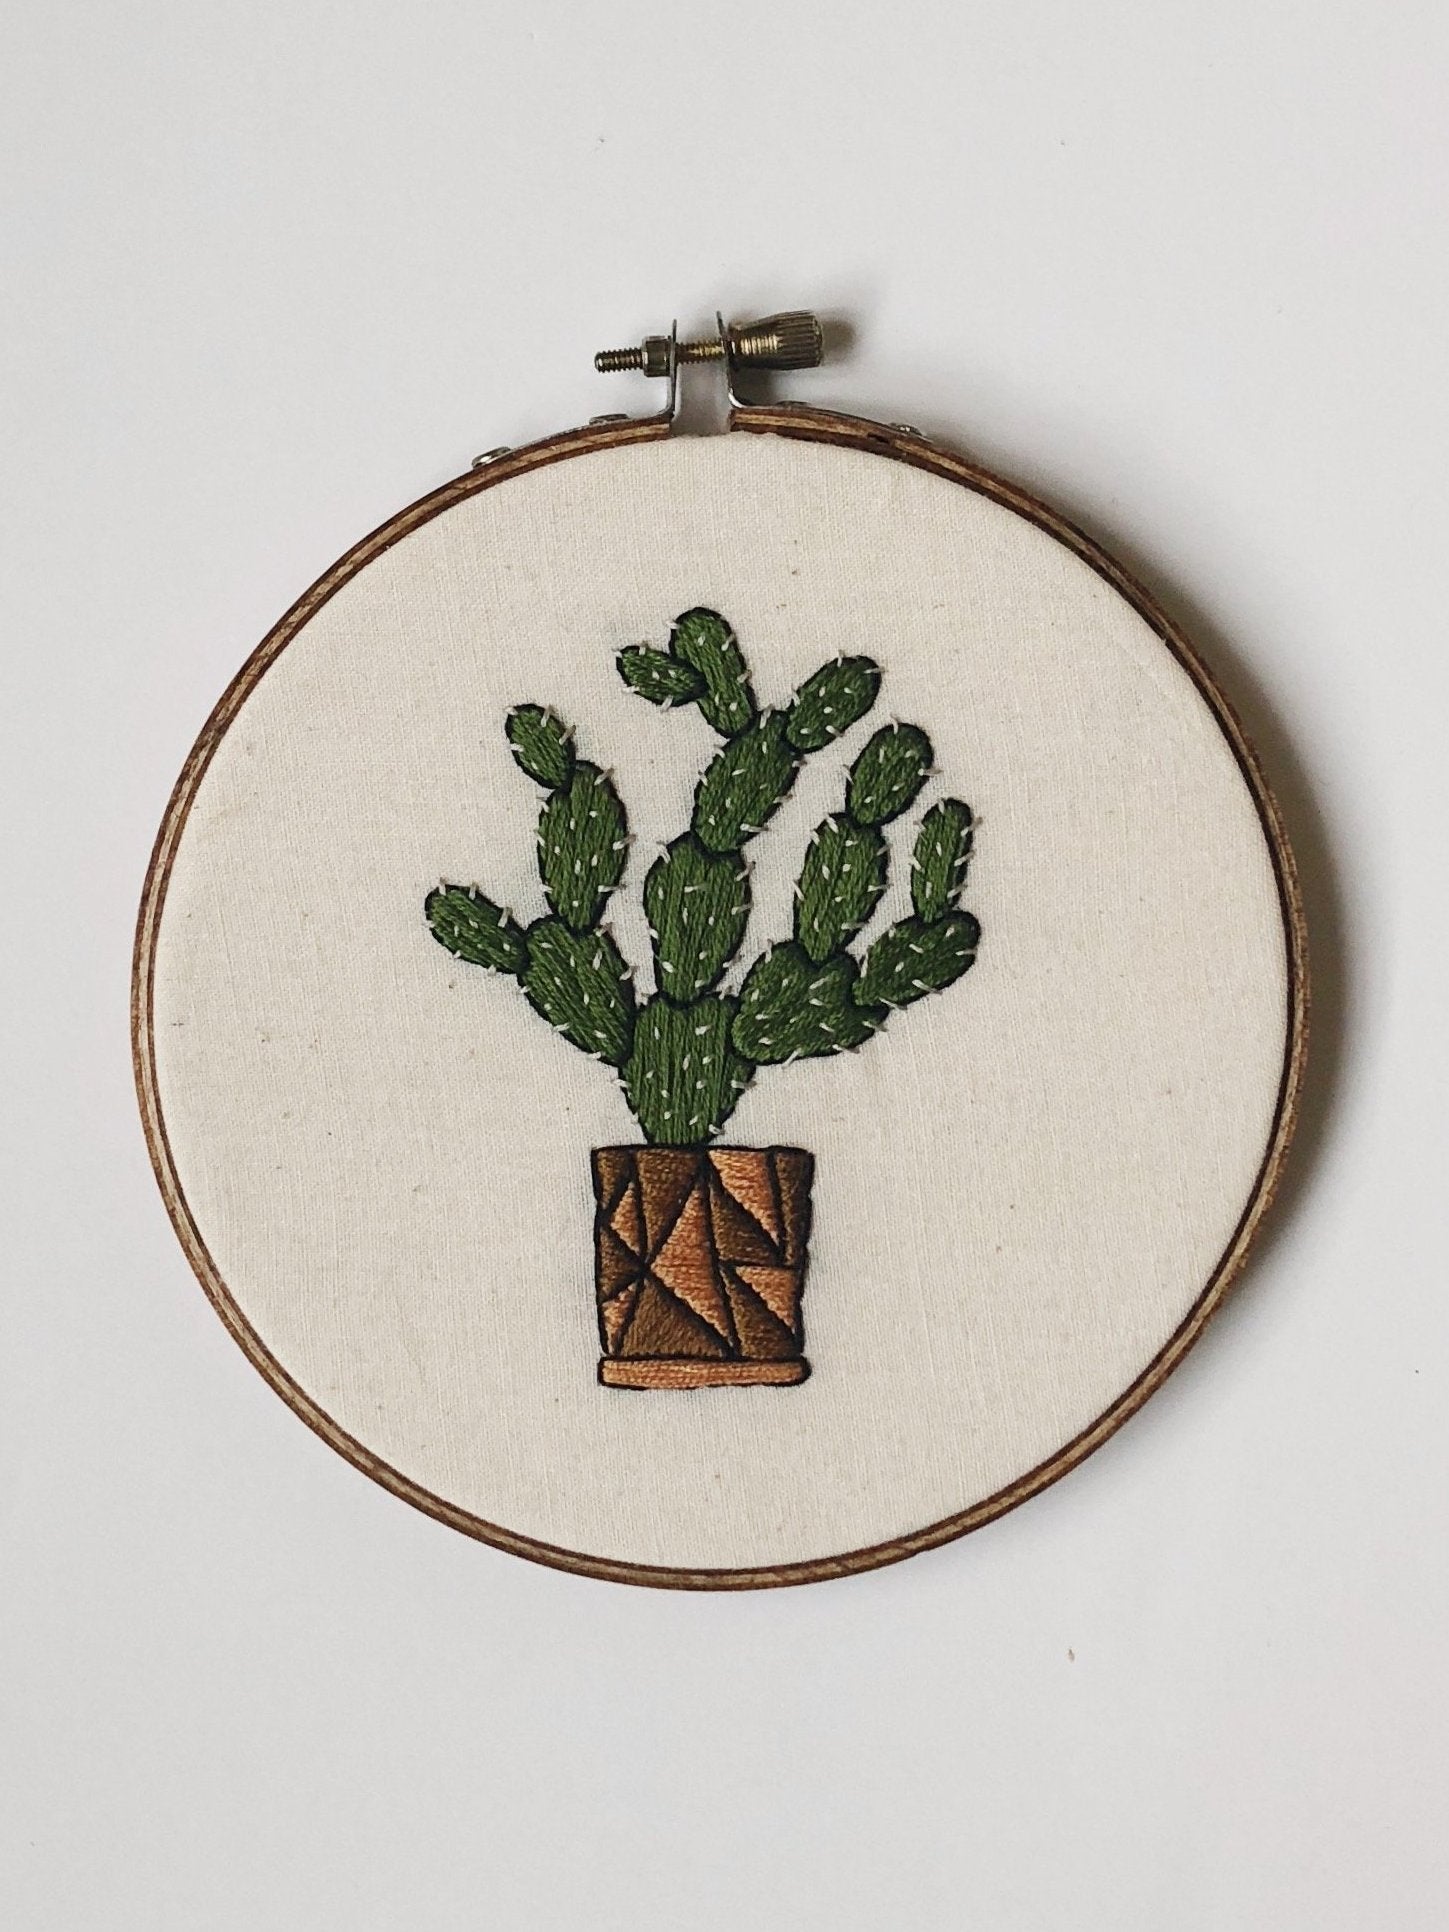 Cactus Cross Stitch Kit for Beginners